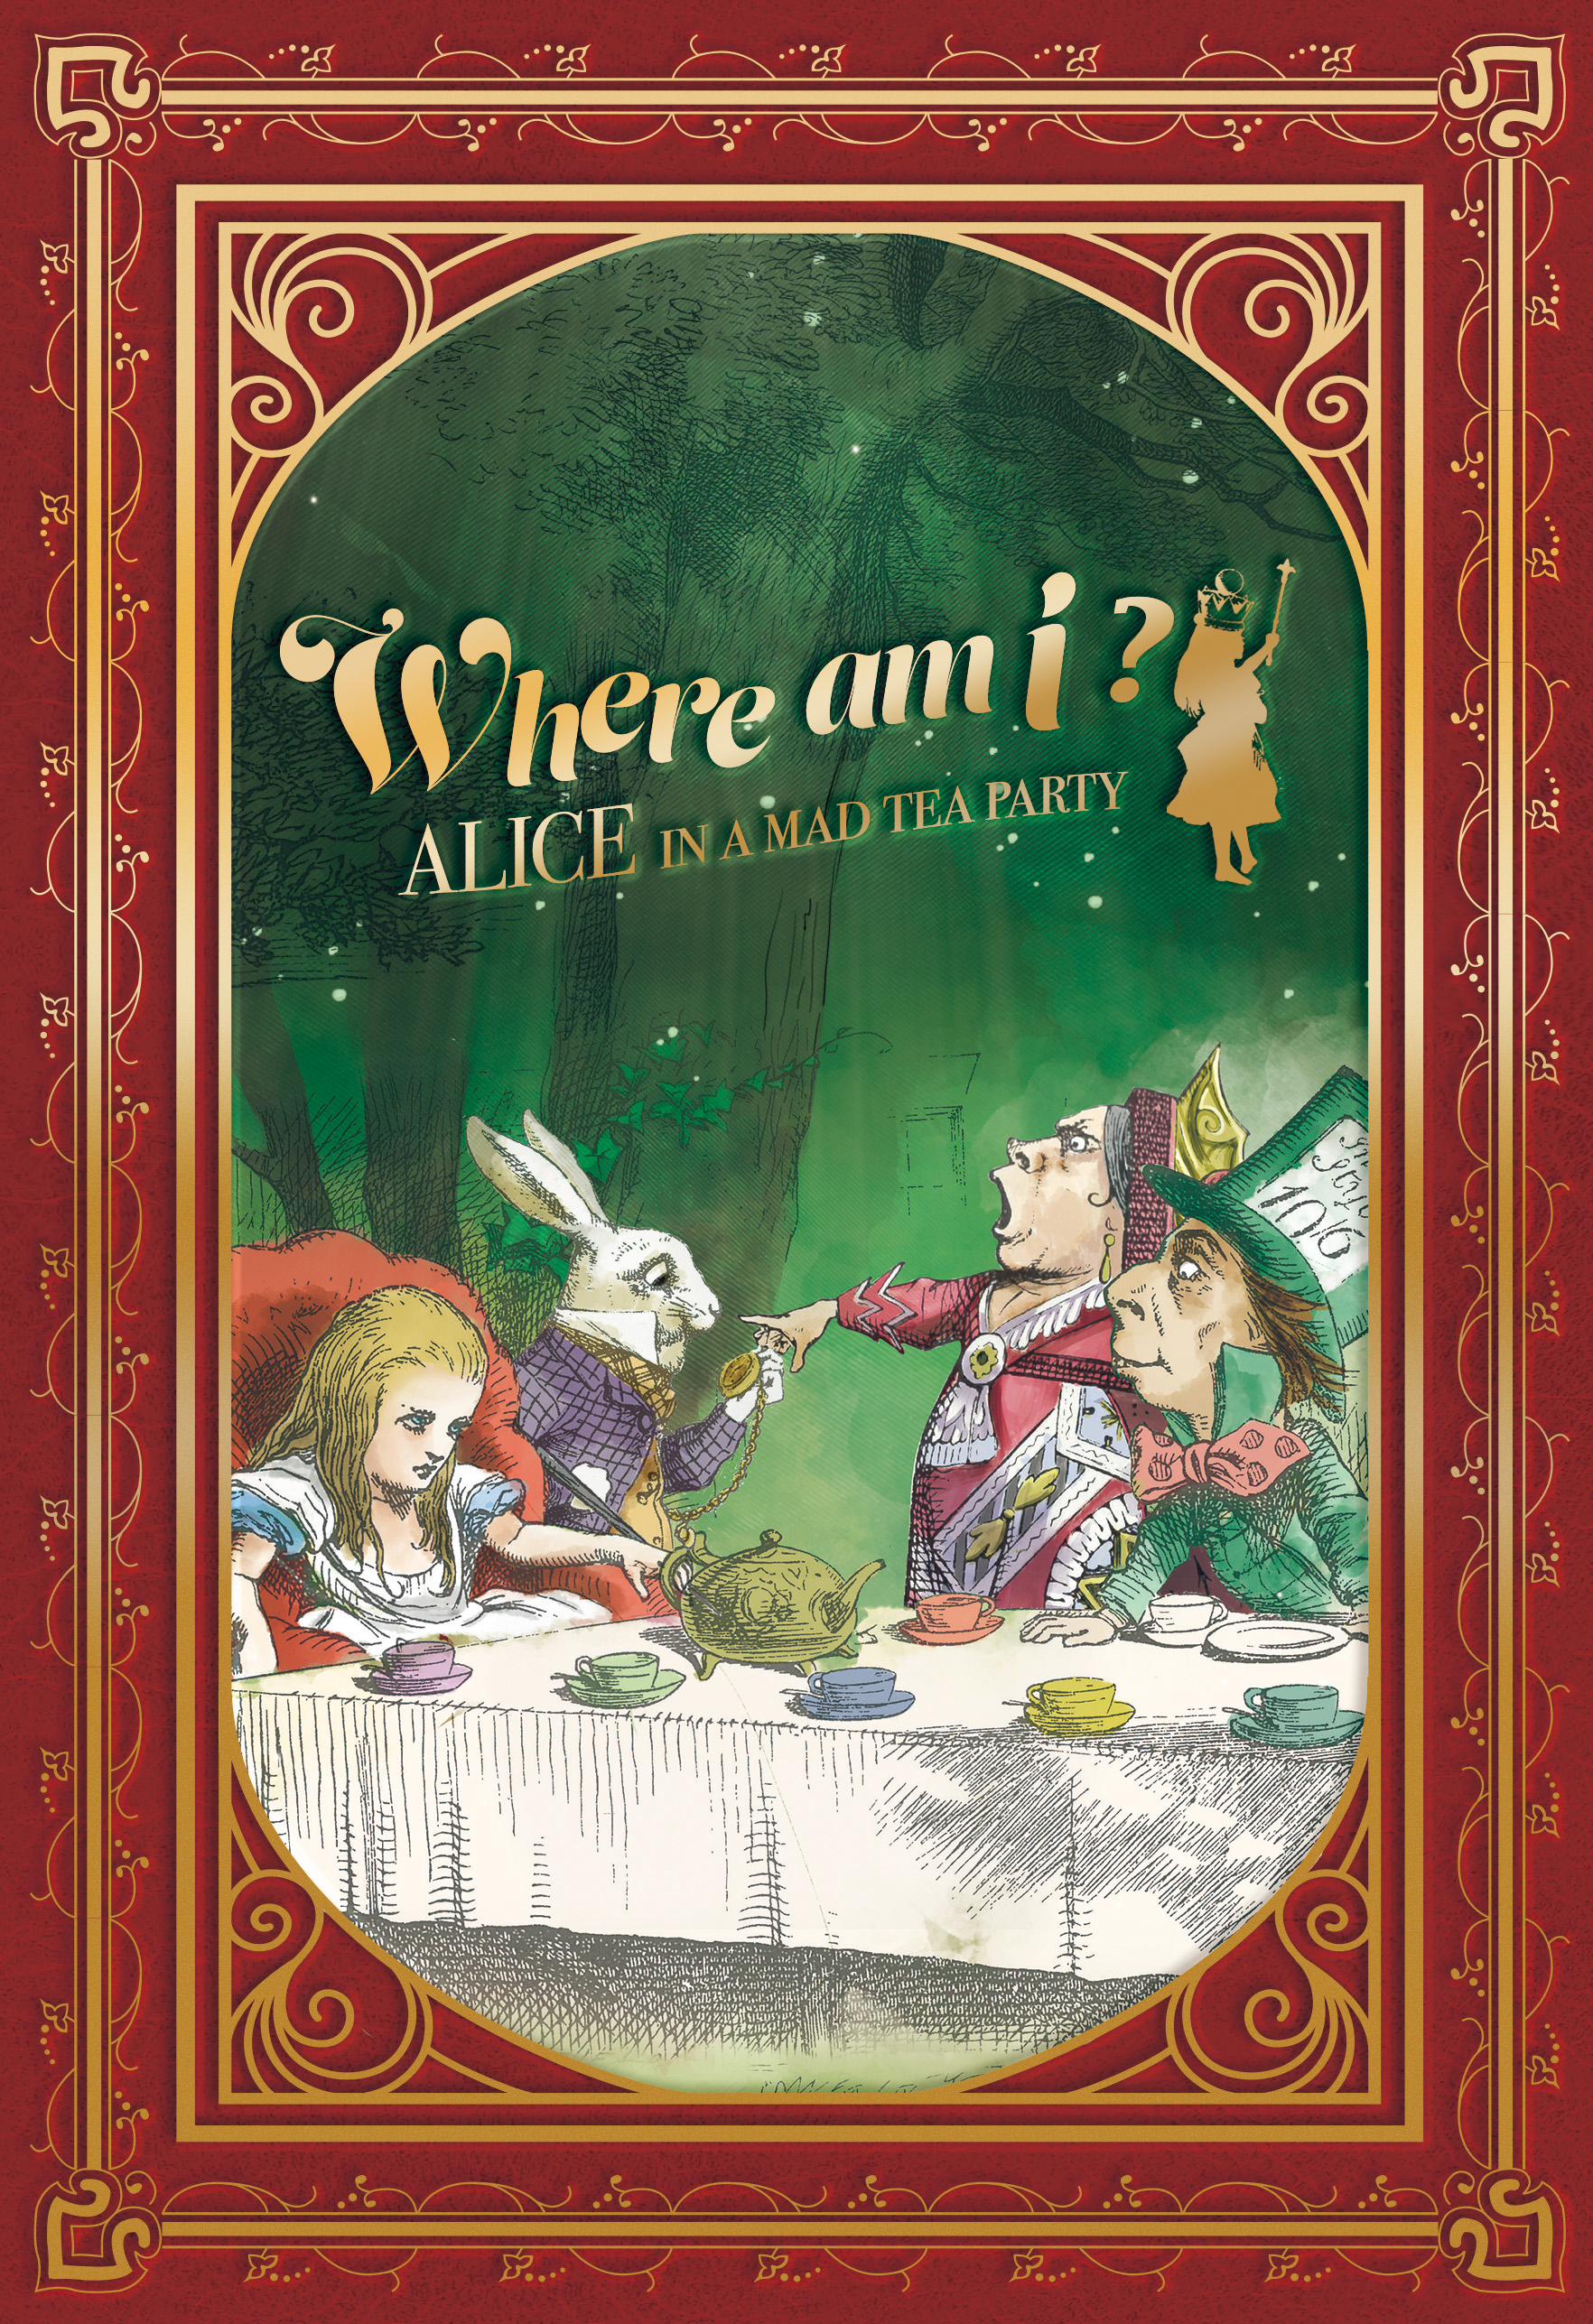 Where am i Alice in a mad tea party